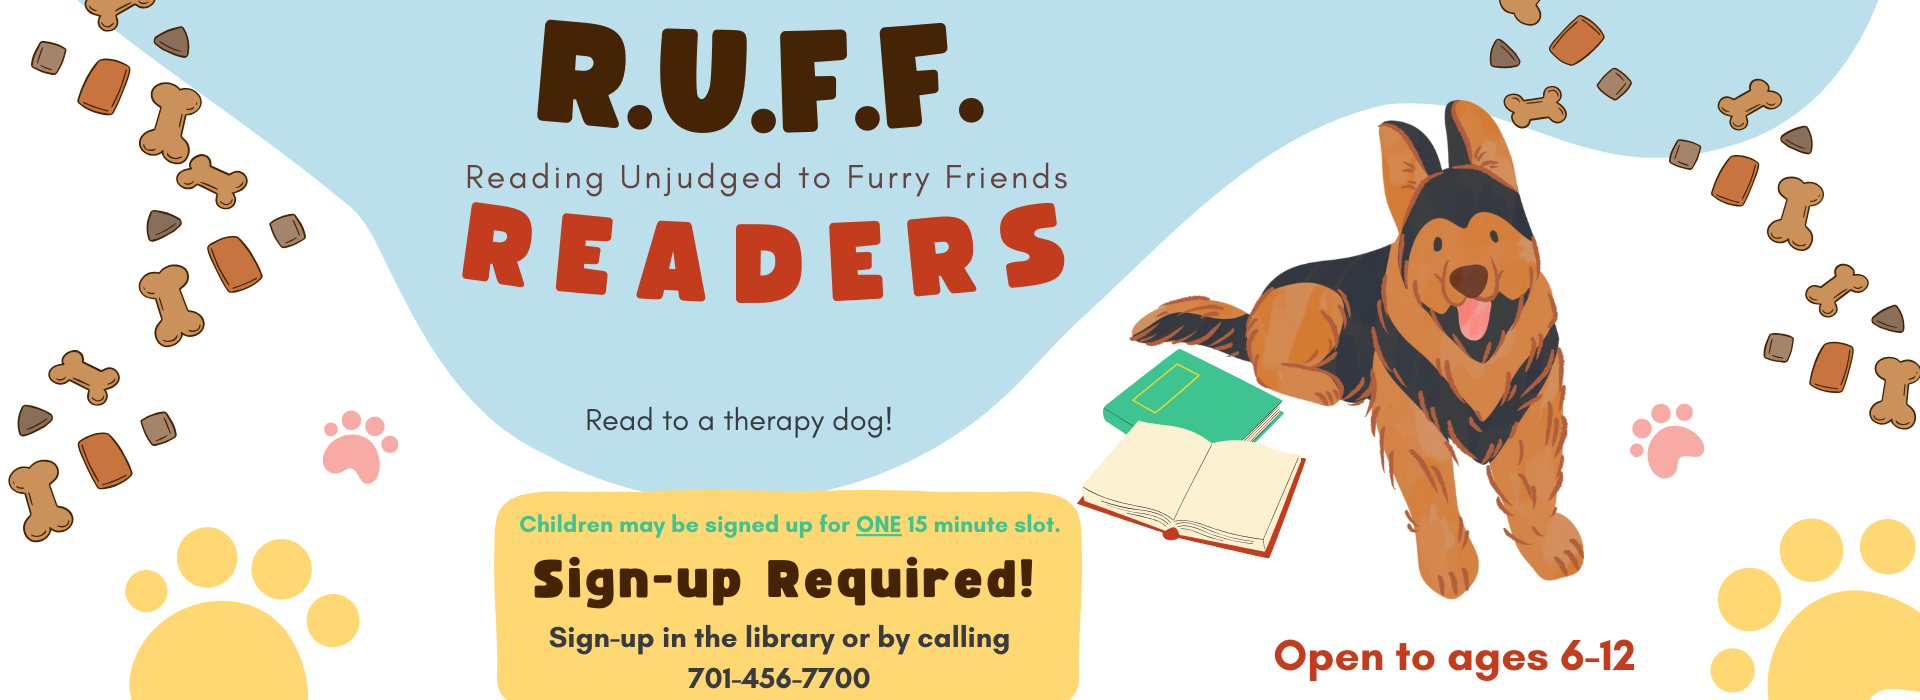 RUFF Readers April 22nd and 29th at 4pm for ages 6-12